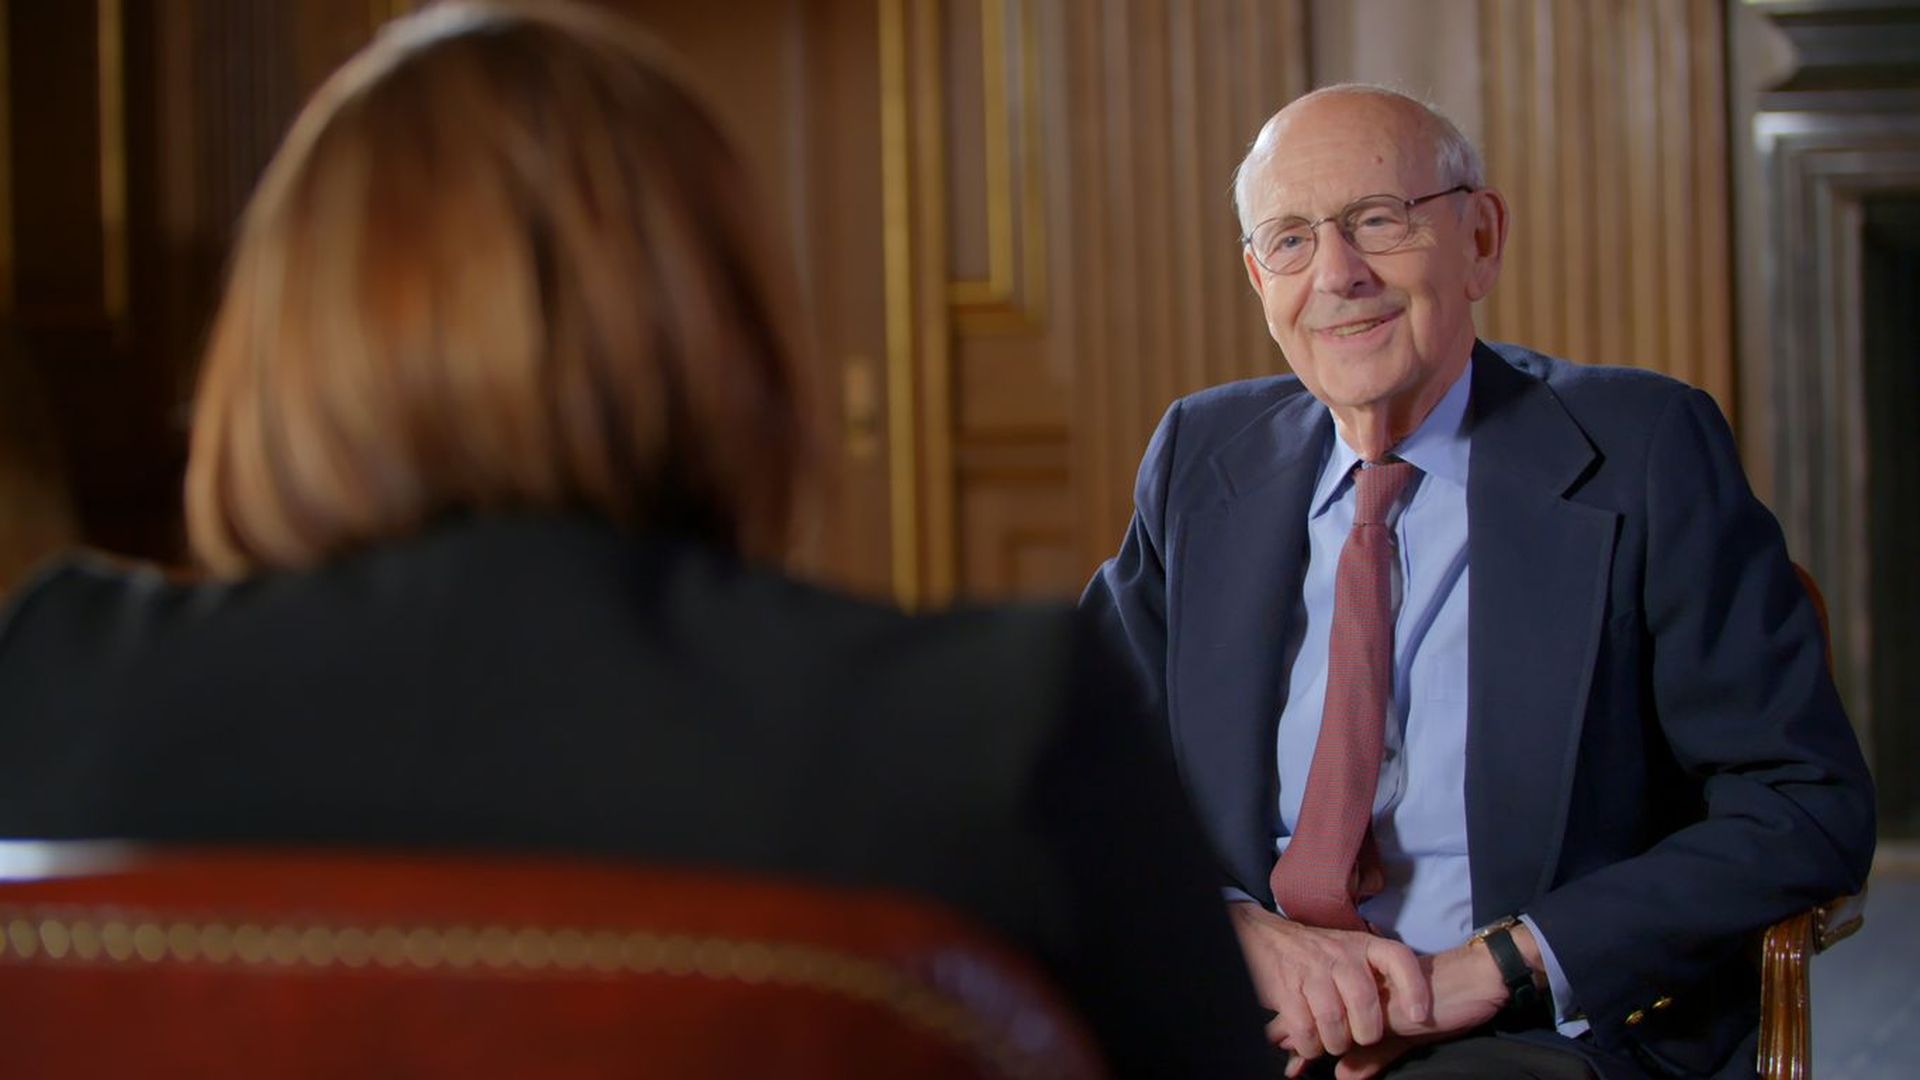 Supreme Court Justice Stephen Breyer is seen during an interview with Axios' Margaret Talev.